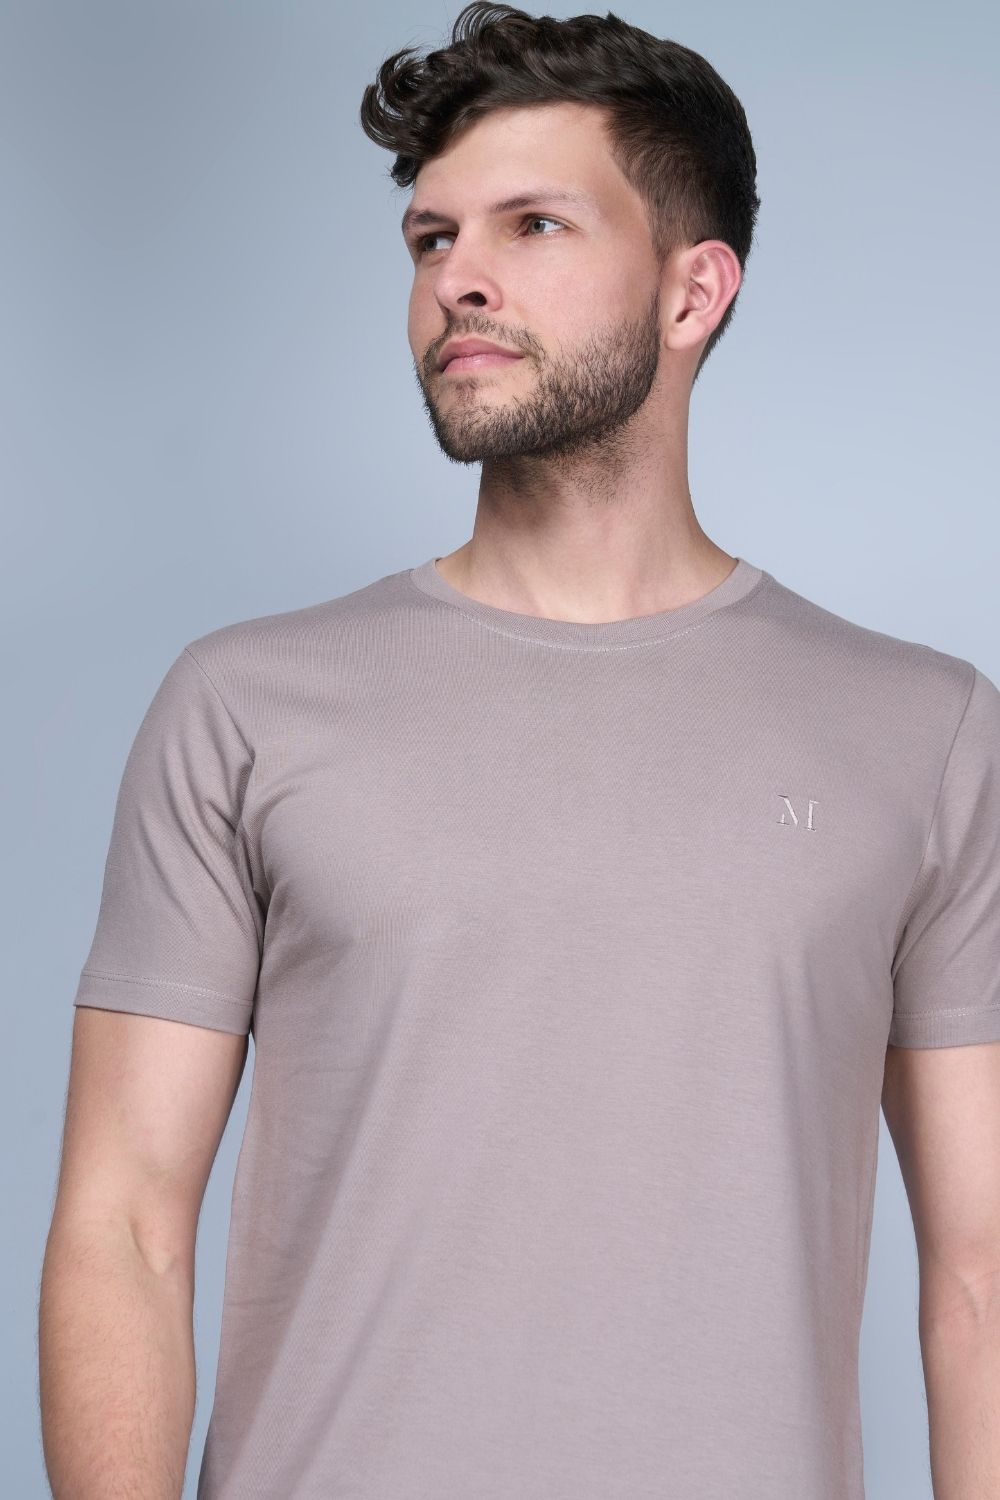 Coin grey colored, solid t shirt for men with round neck and half sleeves, front view.